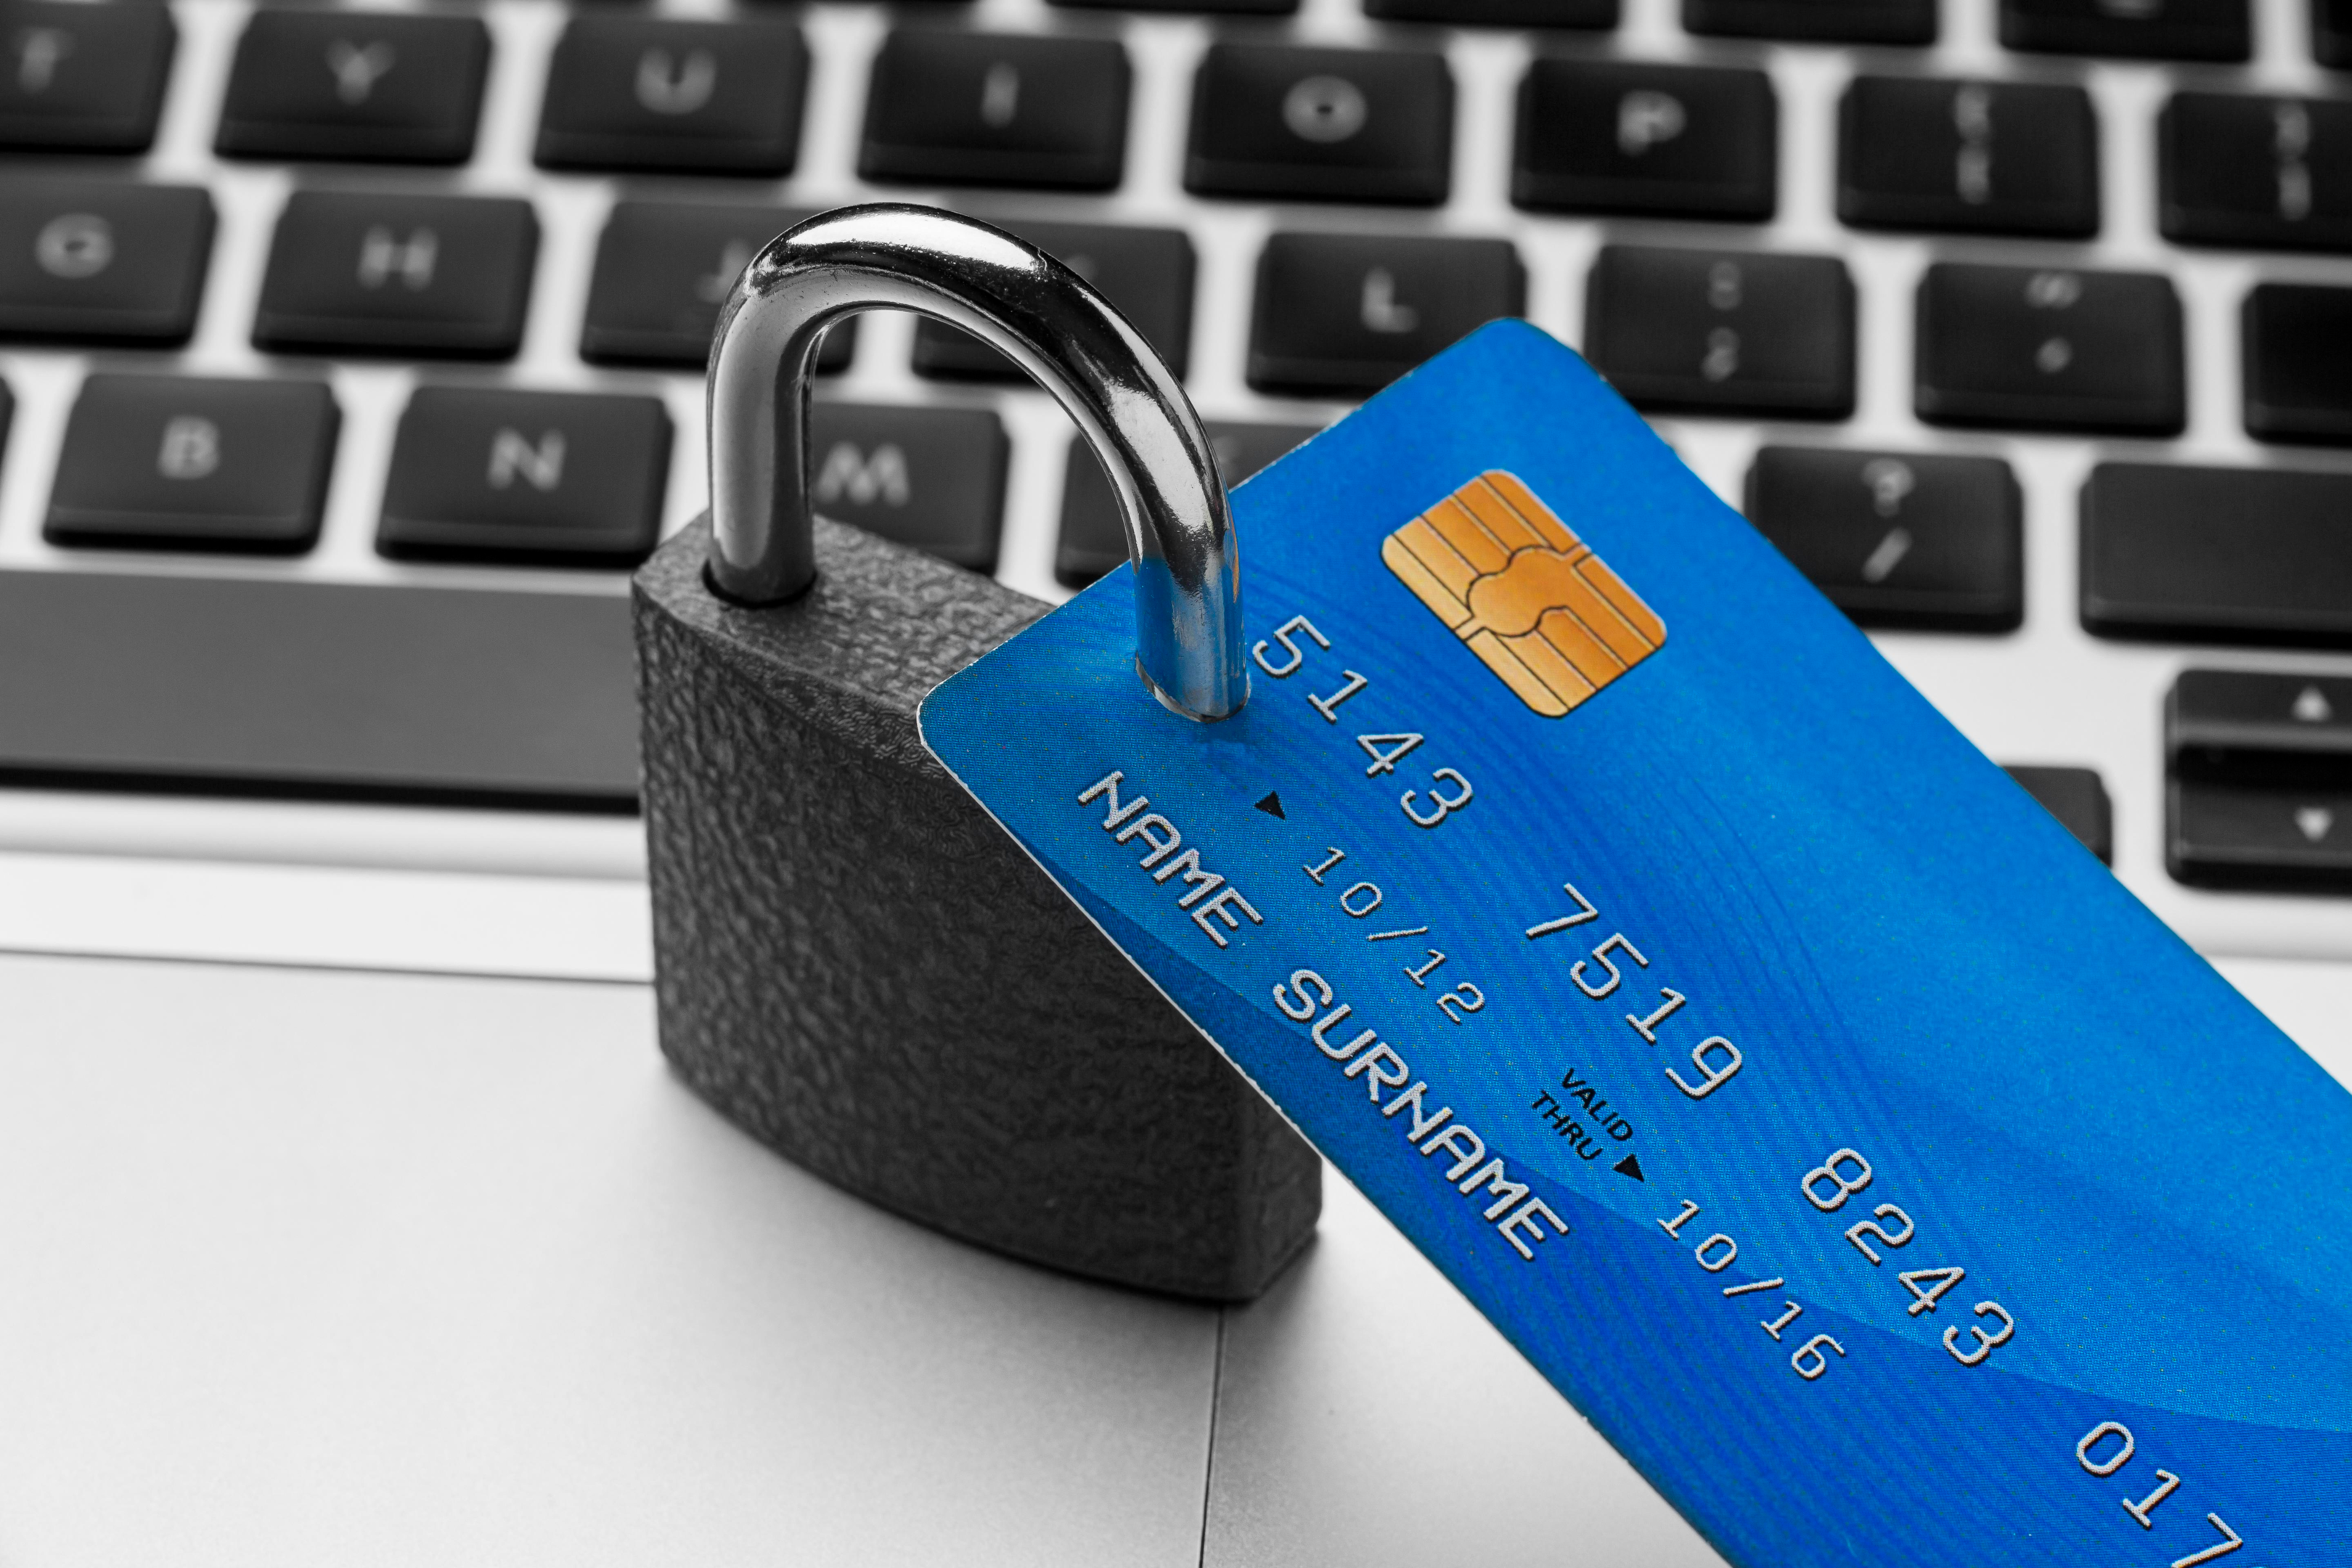 The image symbolizes essential security controls protecting cardholder data